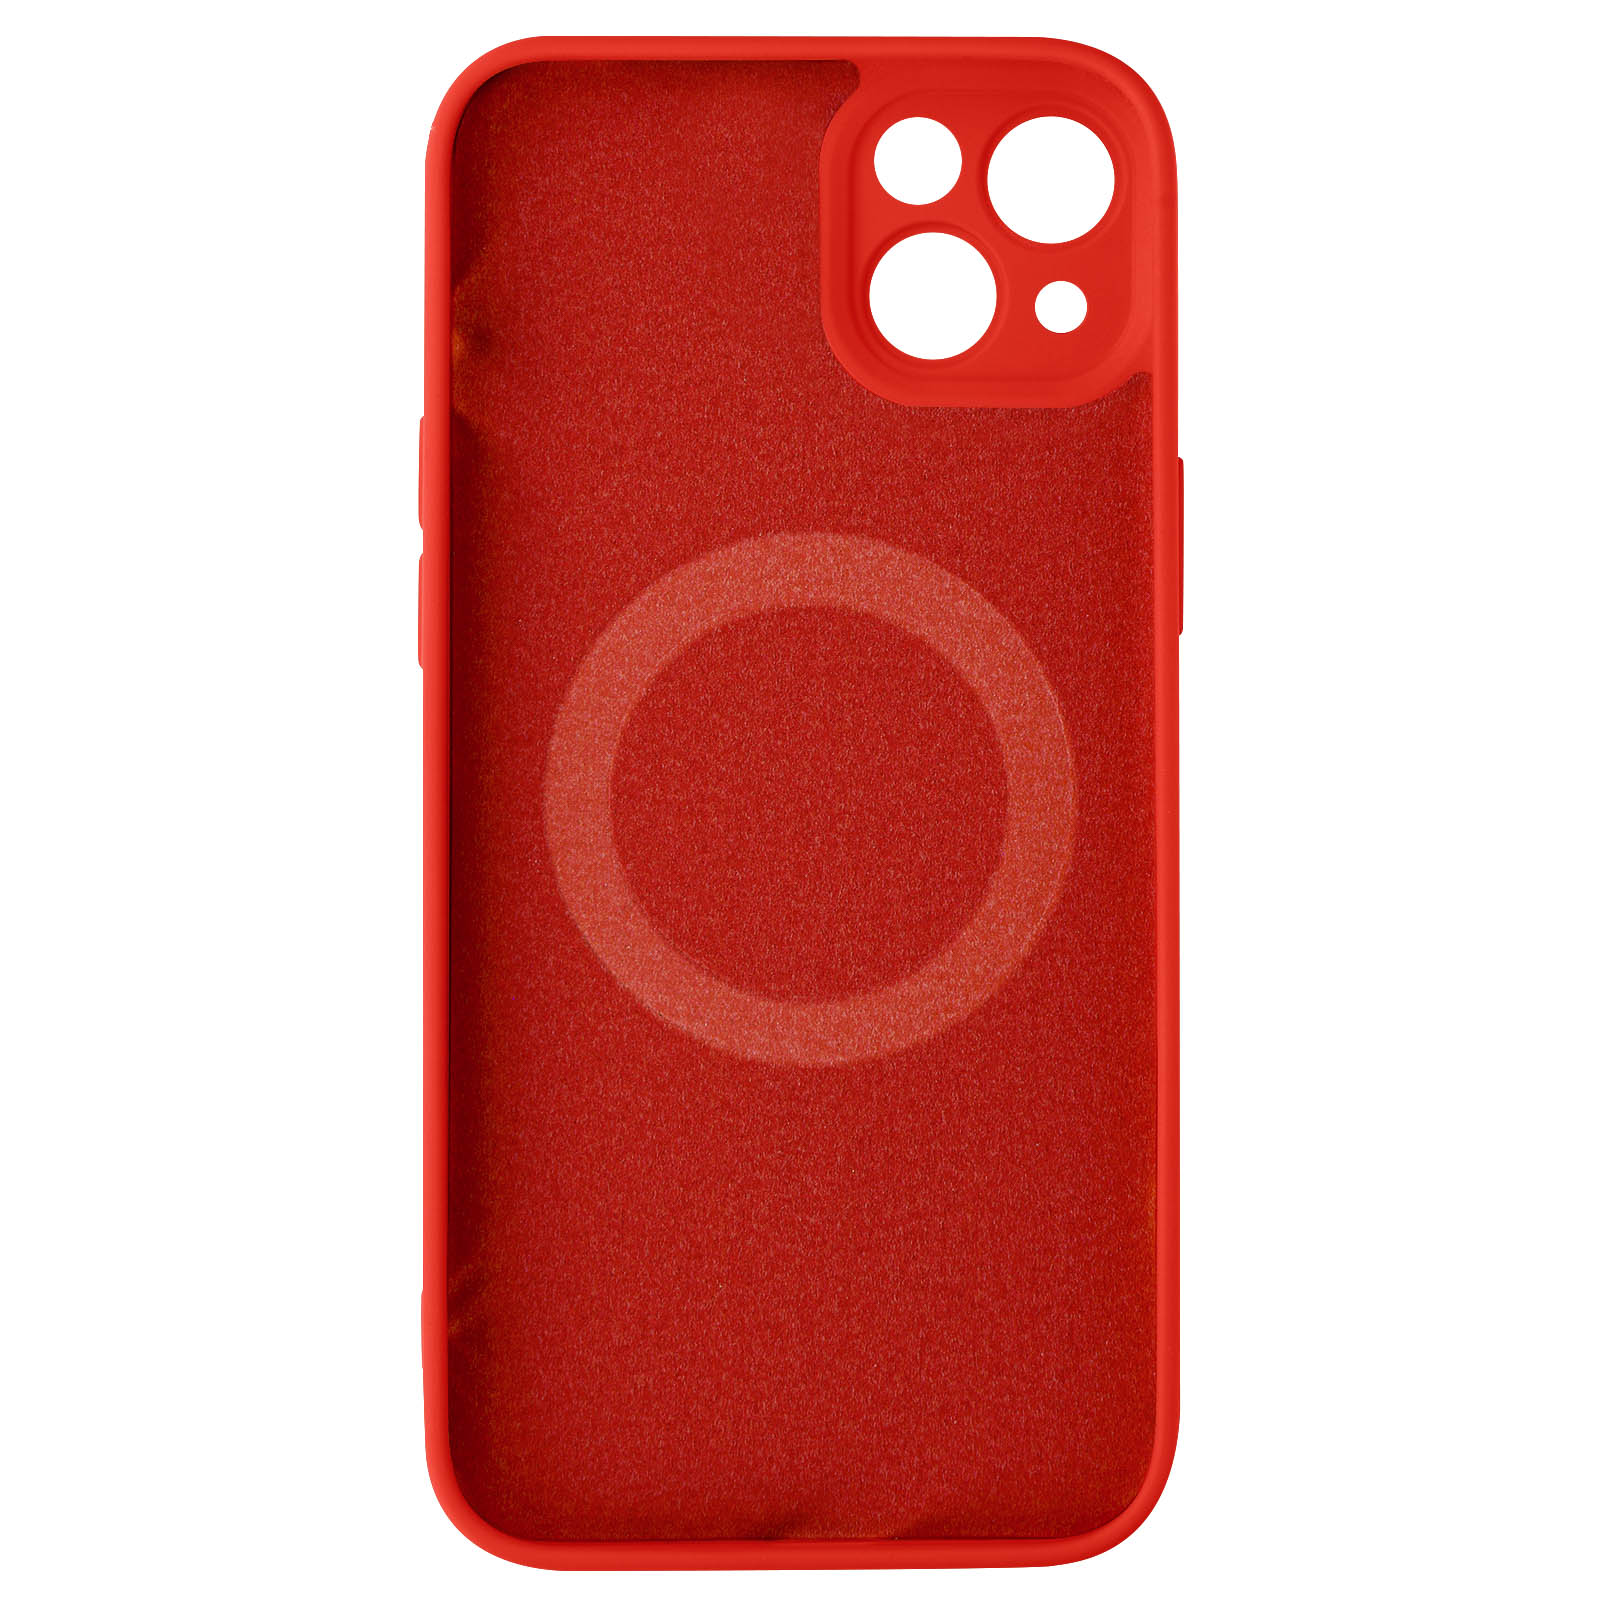 iPhone Backcover, Apple, AVIZAR Rot 14, Fast Series,